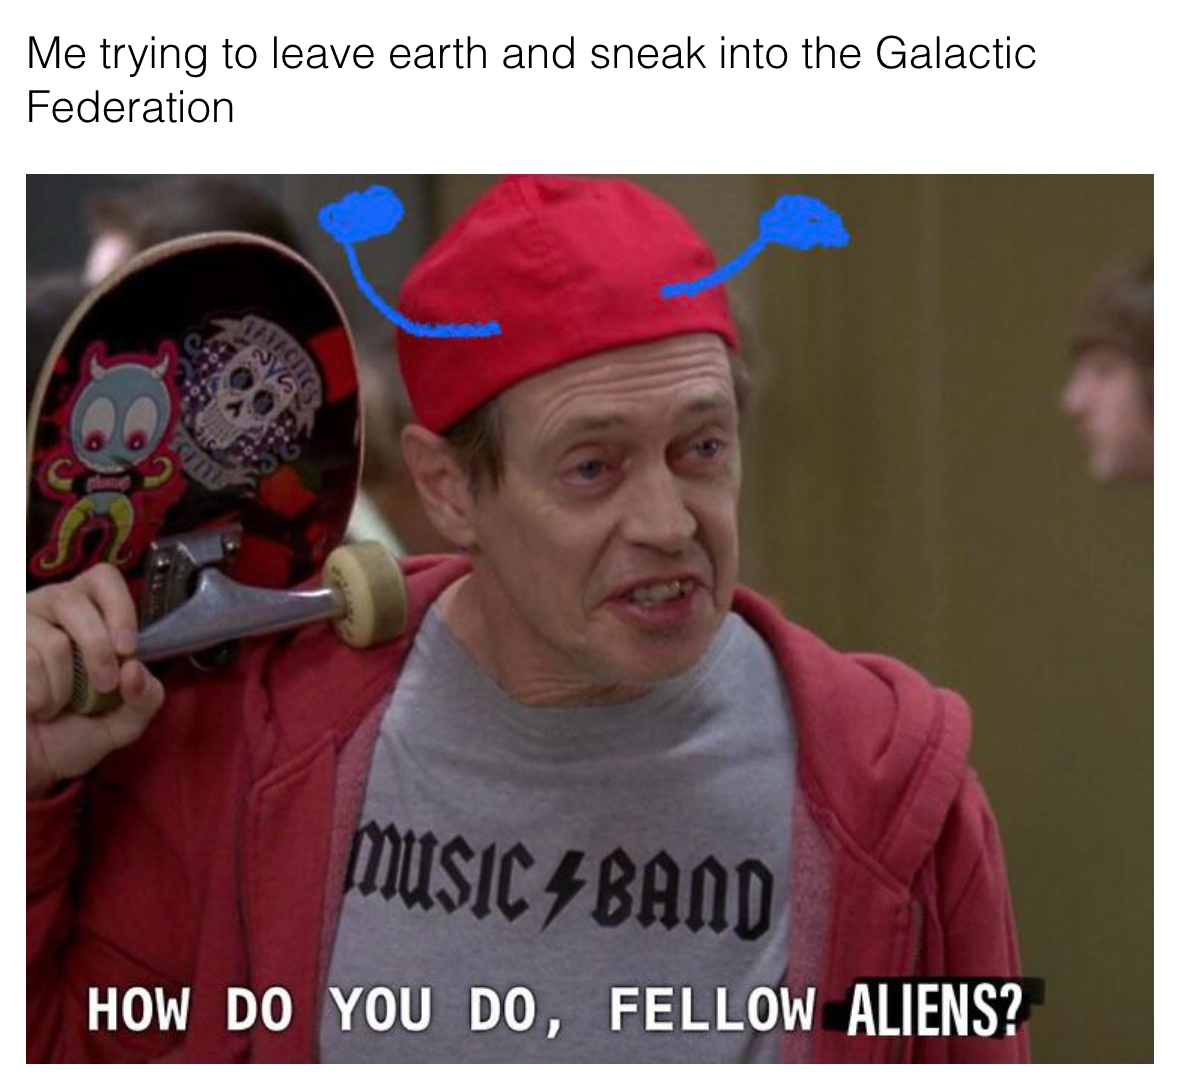 30 rock memes - Me trying to leave earth and sneak into the Galactic Federation music 4 Band How Do You Do, Fellow Aliens?